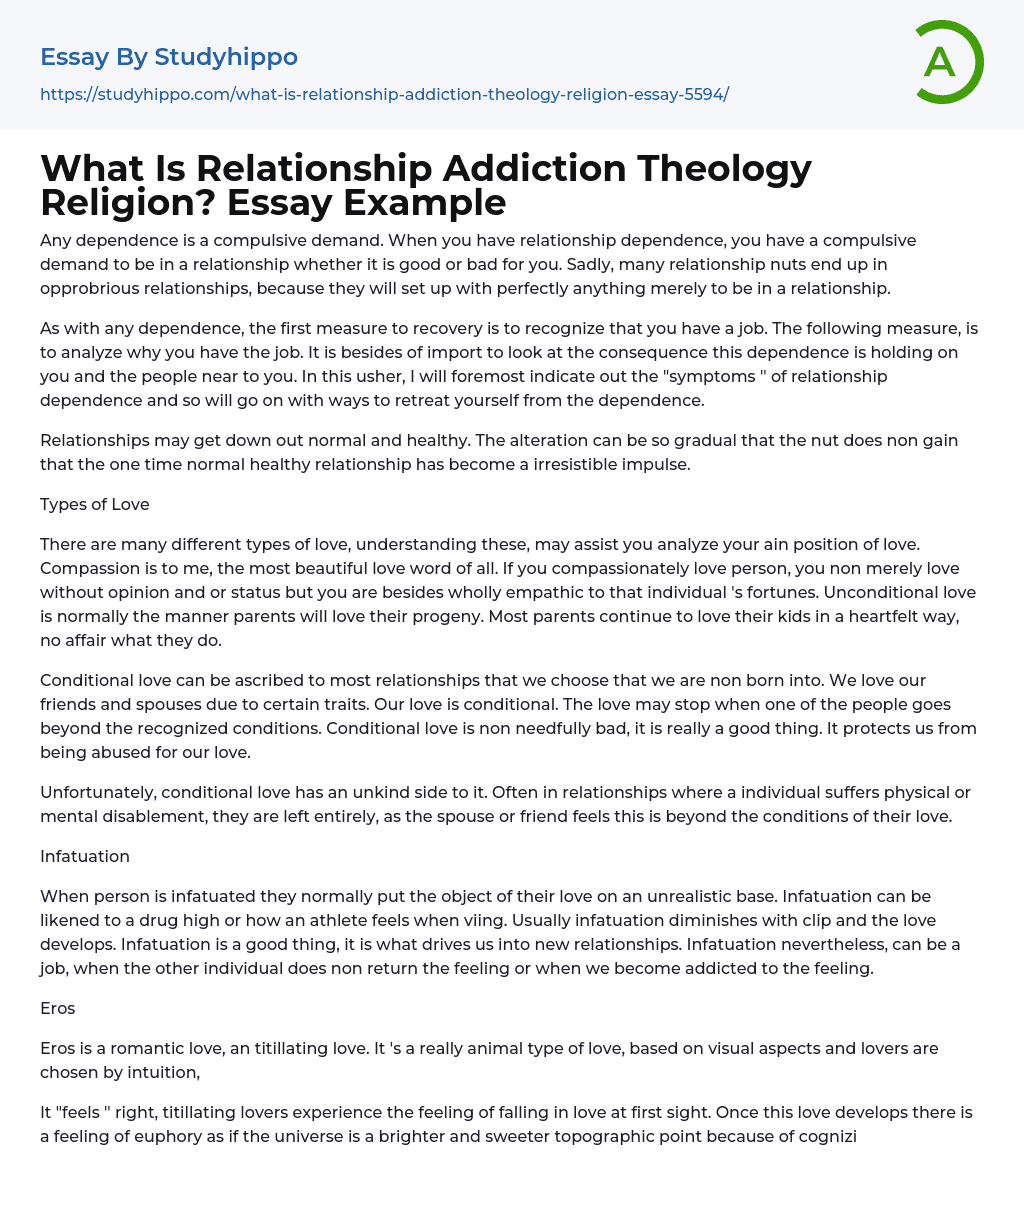 What Is Relationship Addiction Theology Religion? Essay Example